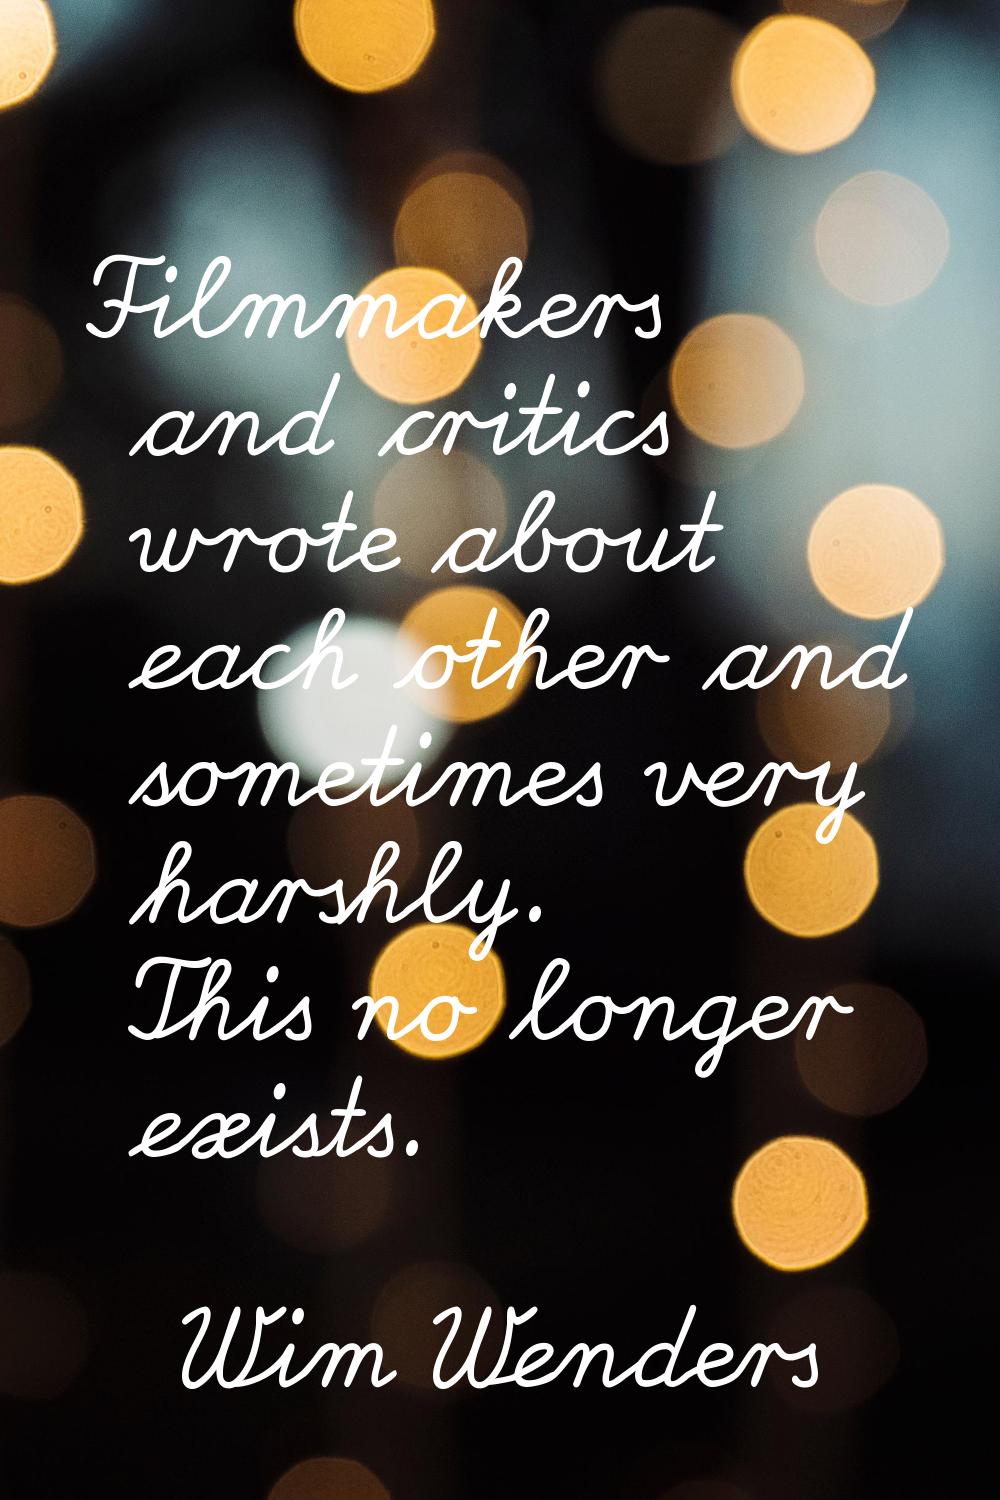 Filmmakers and critics wrote about each other and sometimes very harshly. This no longer exists.